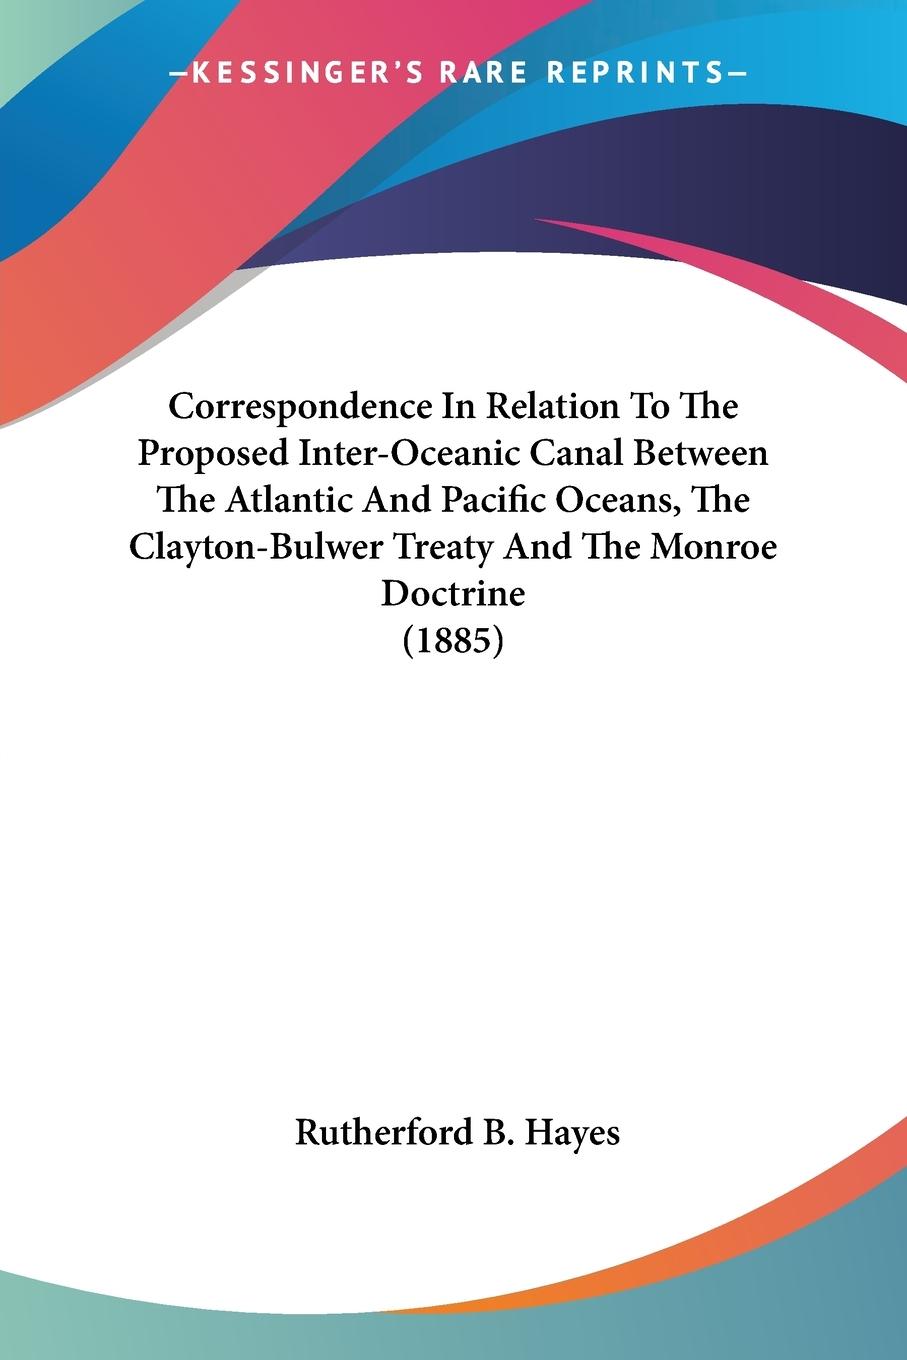 Correspondence In Relation To The Proposed Inter-Oceanic Canal Between The Atlantic And Pacific Oceans, The Clayton-Bulwer Treaty And The Monroe Doctrine (1885) - Hayes, Rutherford B.